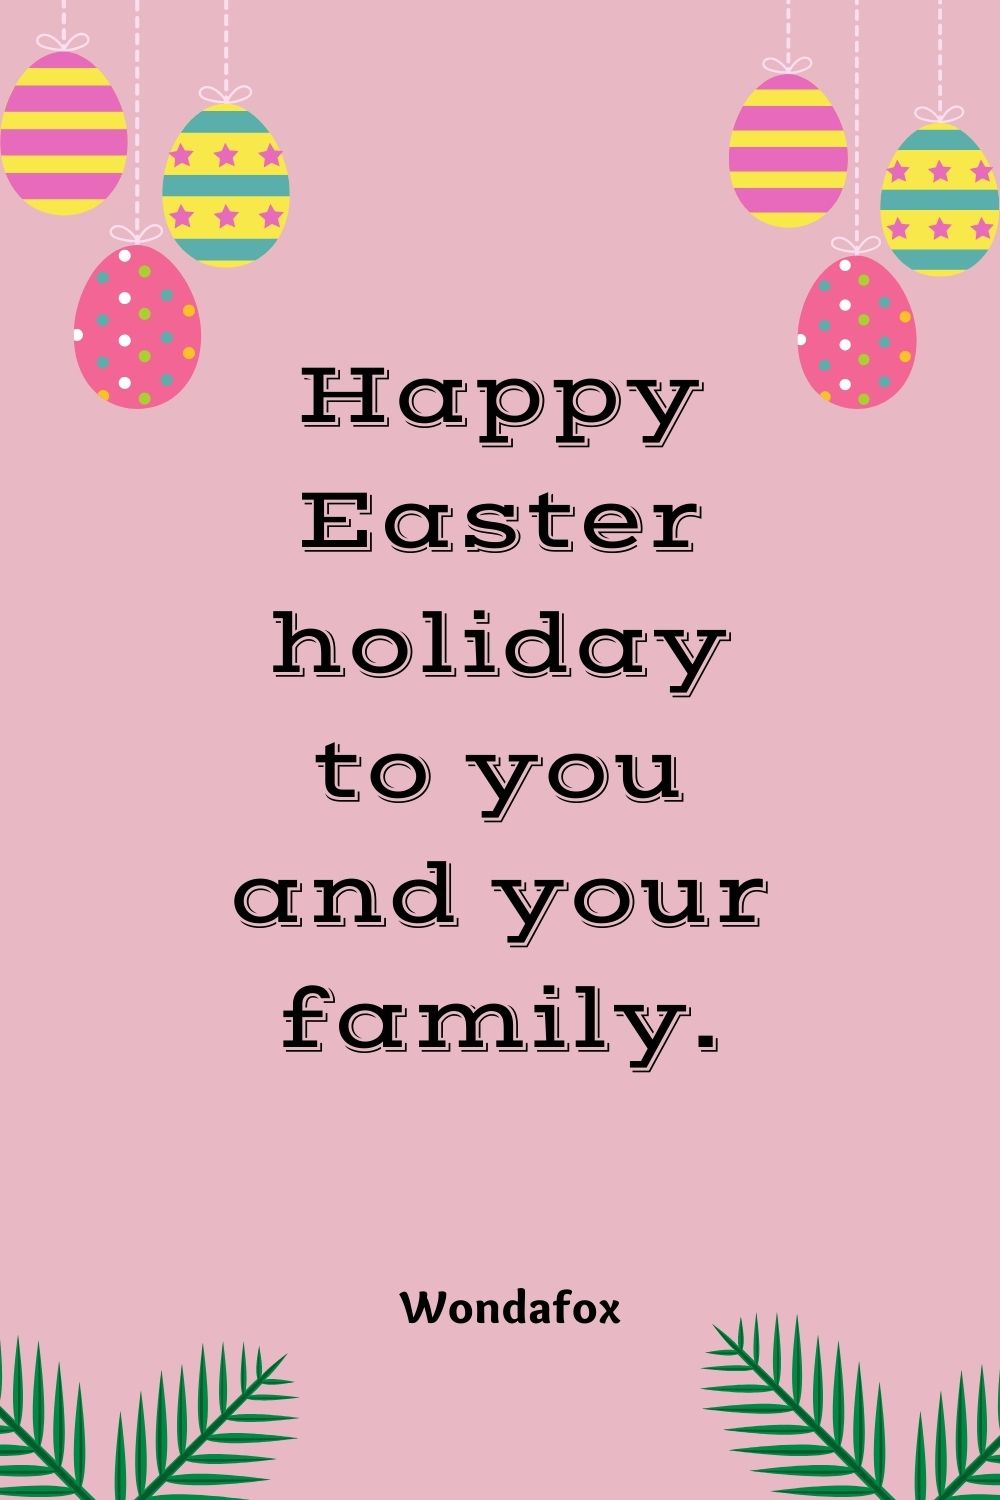 Happy Easter holiday to you and your family.